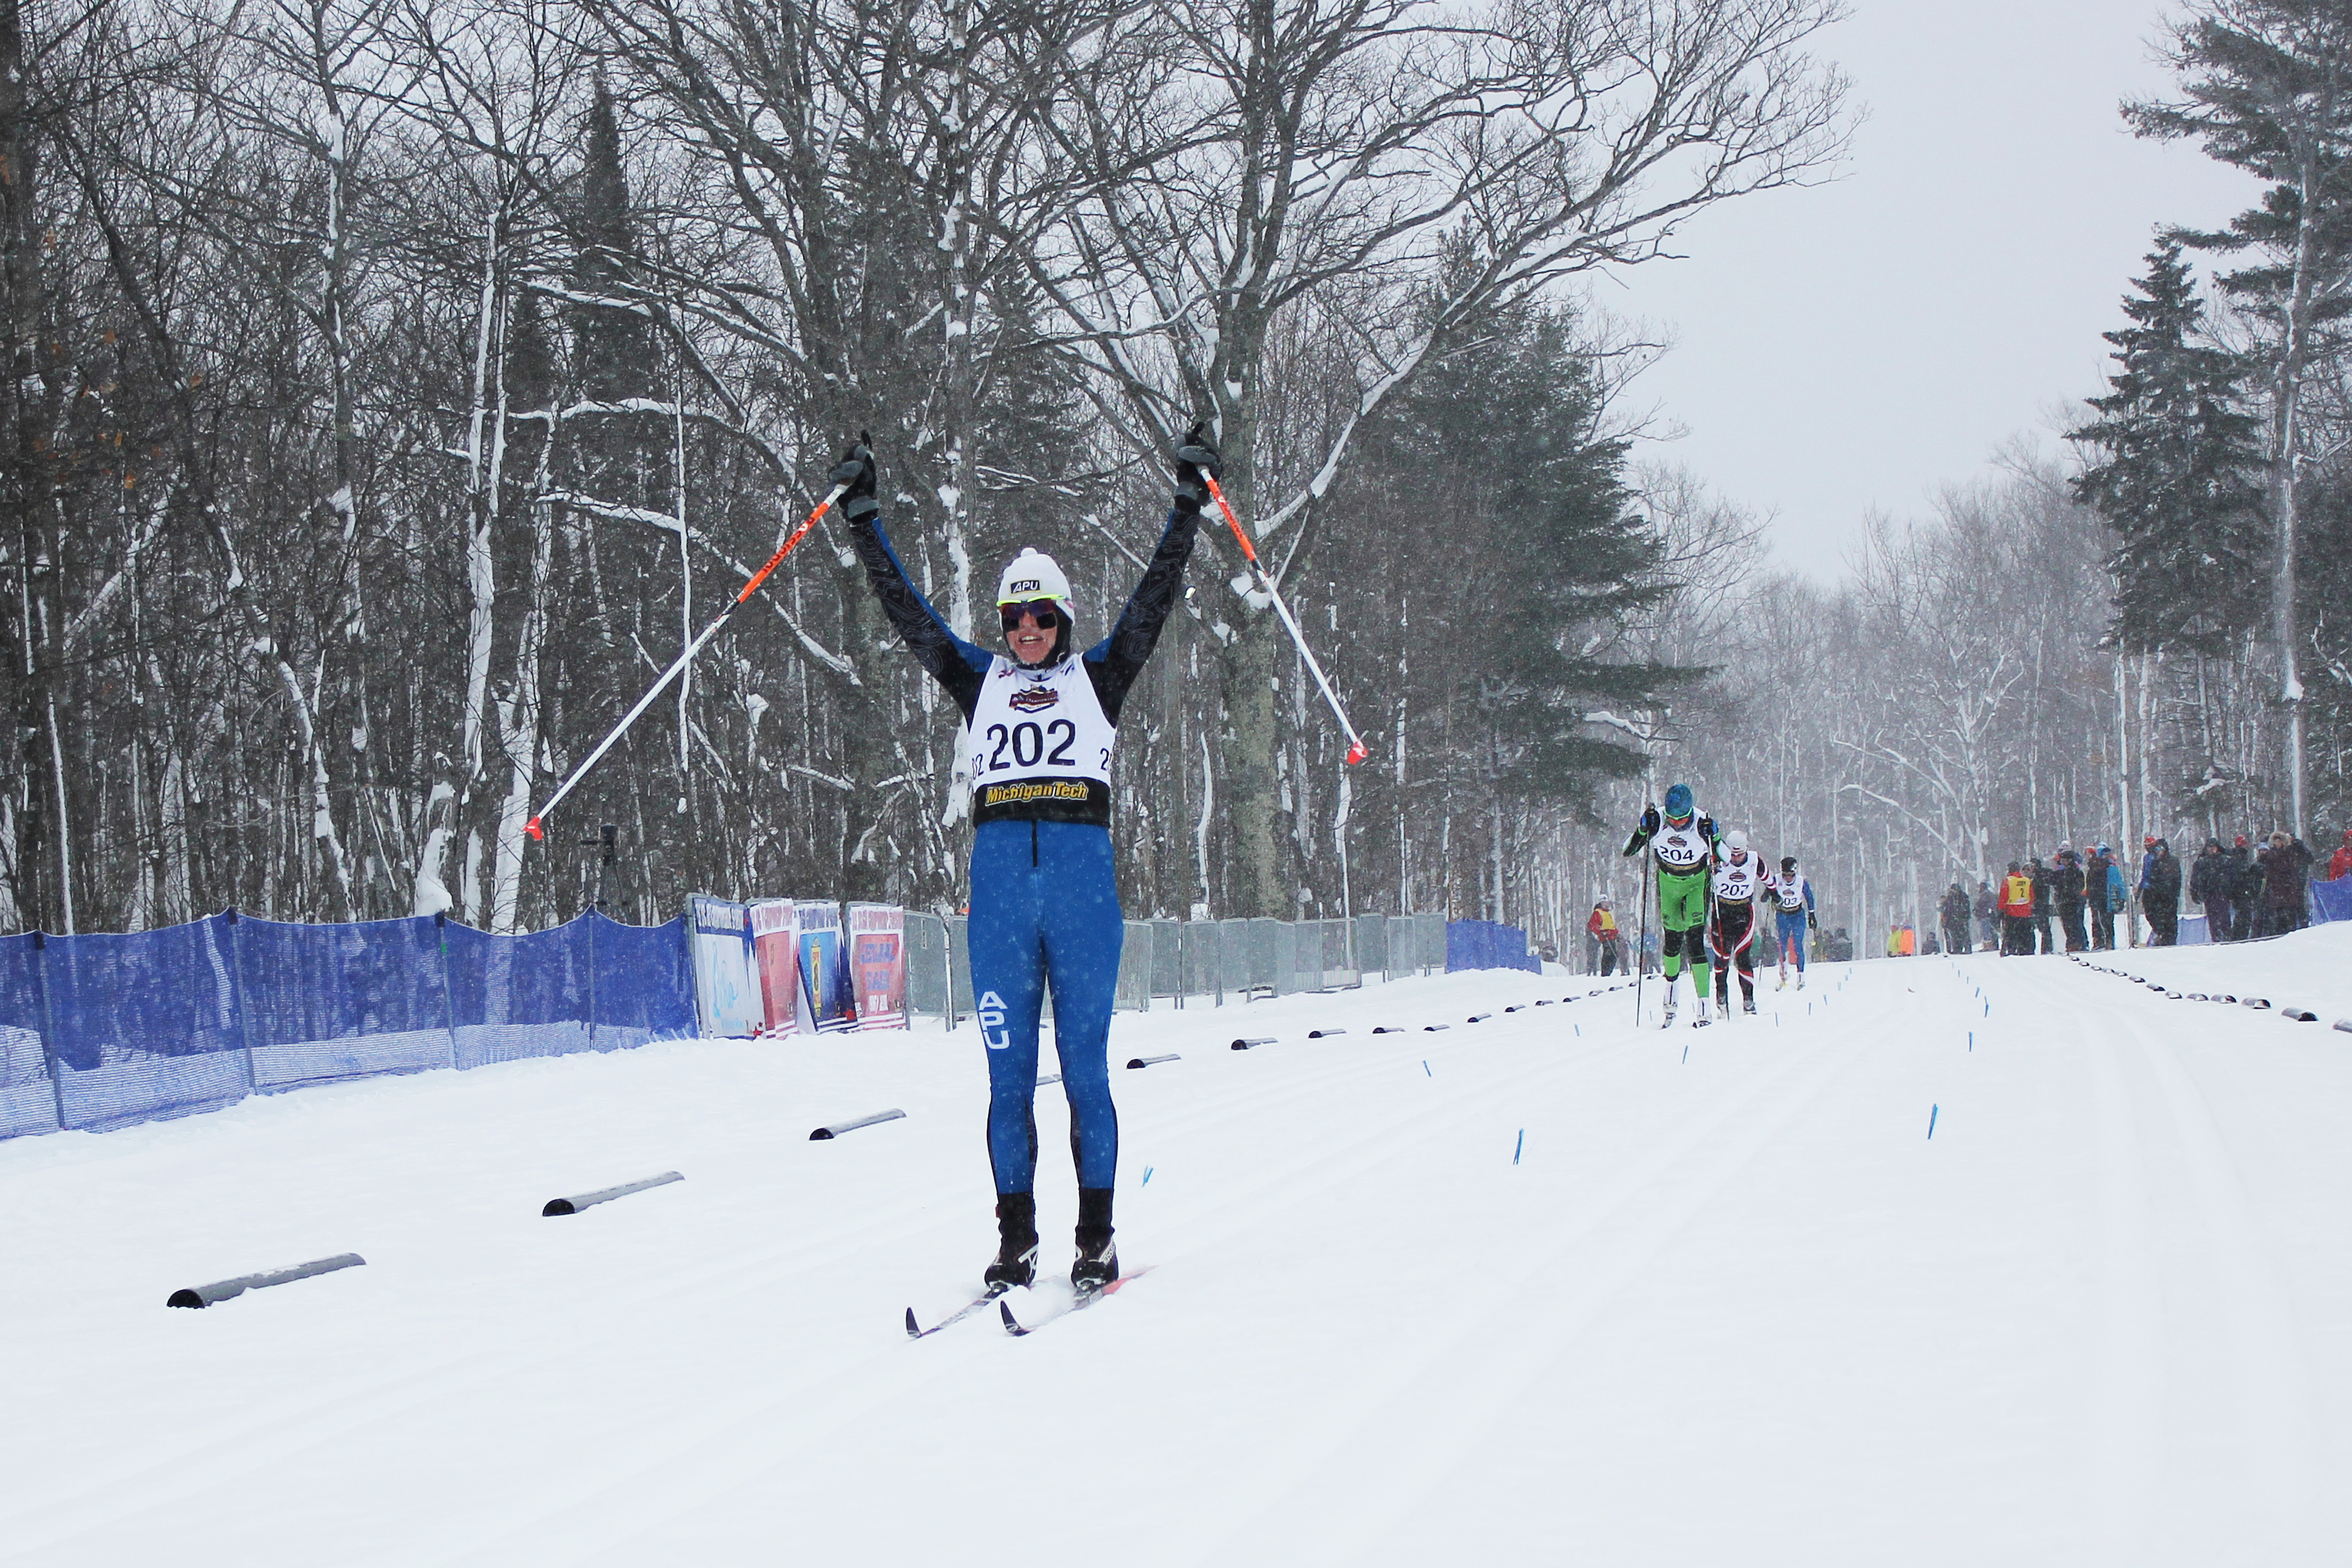 Rosie Brennan (APU) celebrates her win in the 20 k classic mass start at the 2015 U.S. Cross Country Championships in Houghton, Mich. 